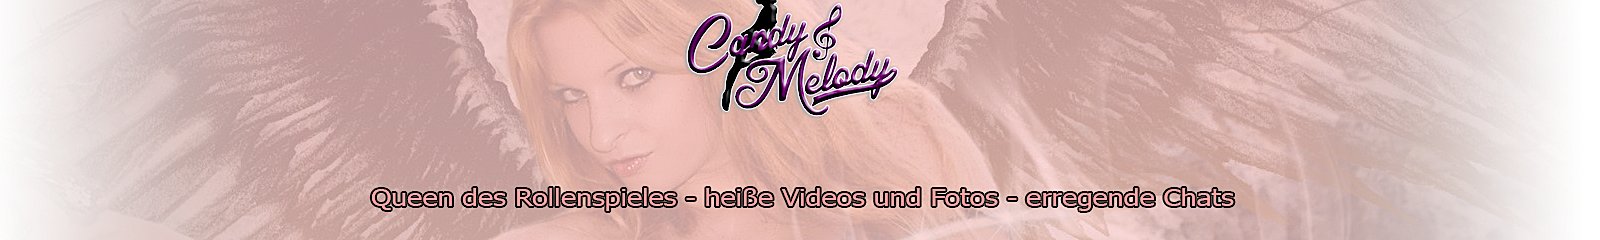 Candy Melody